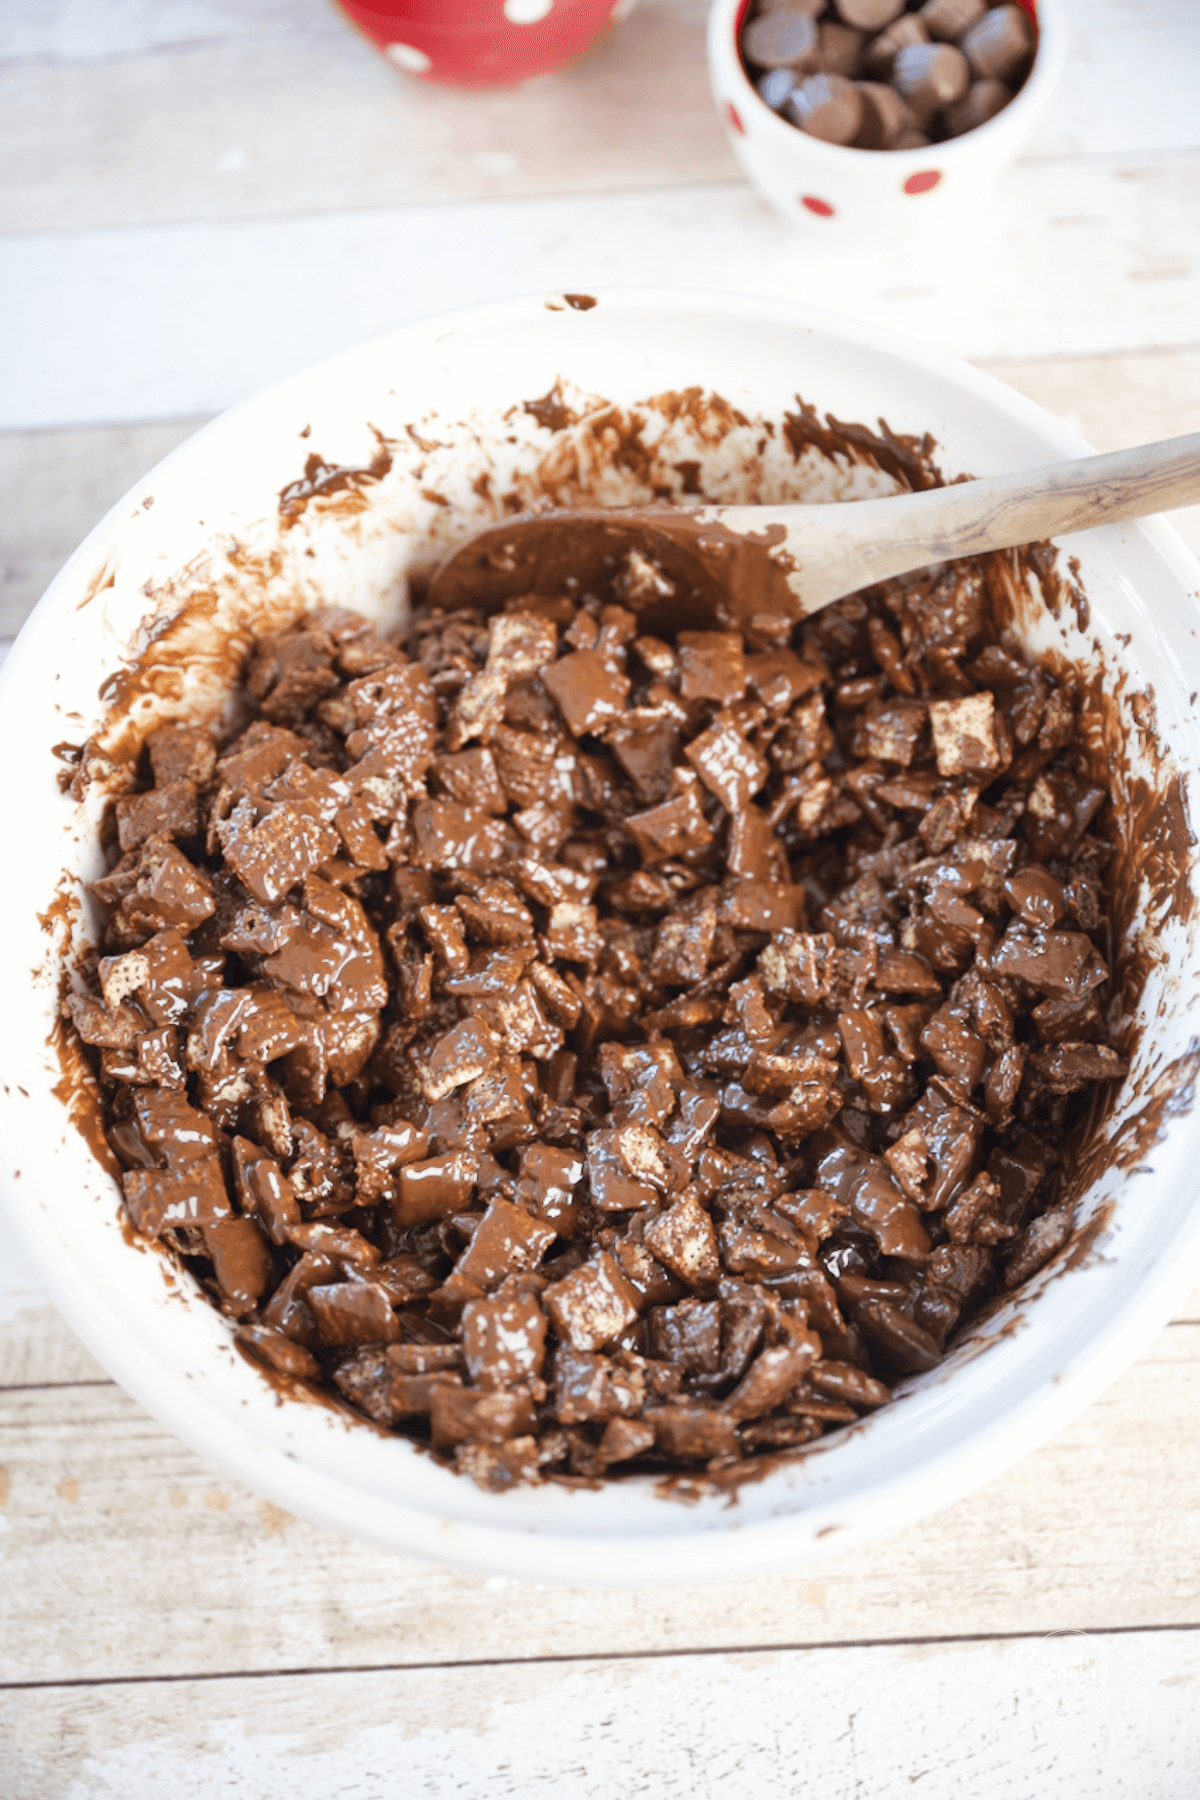 Chocolate coating mixed well into rice cereal.